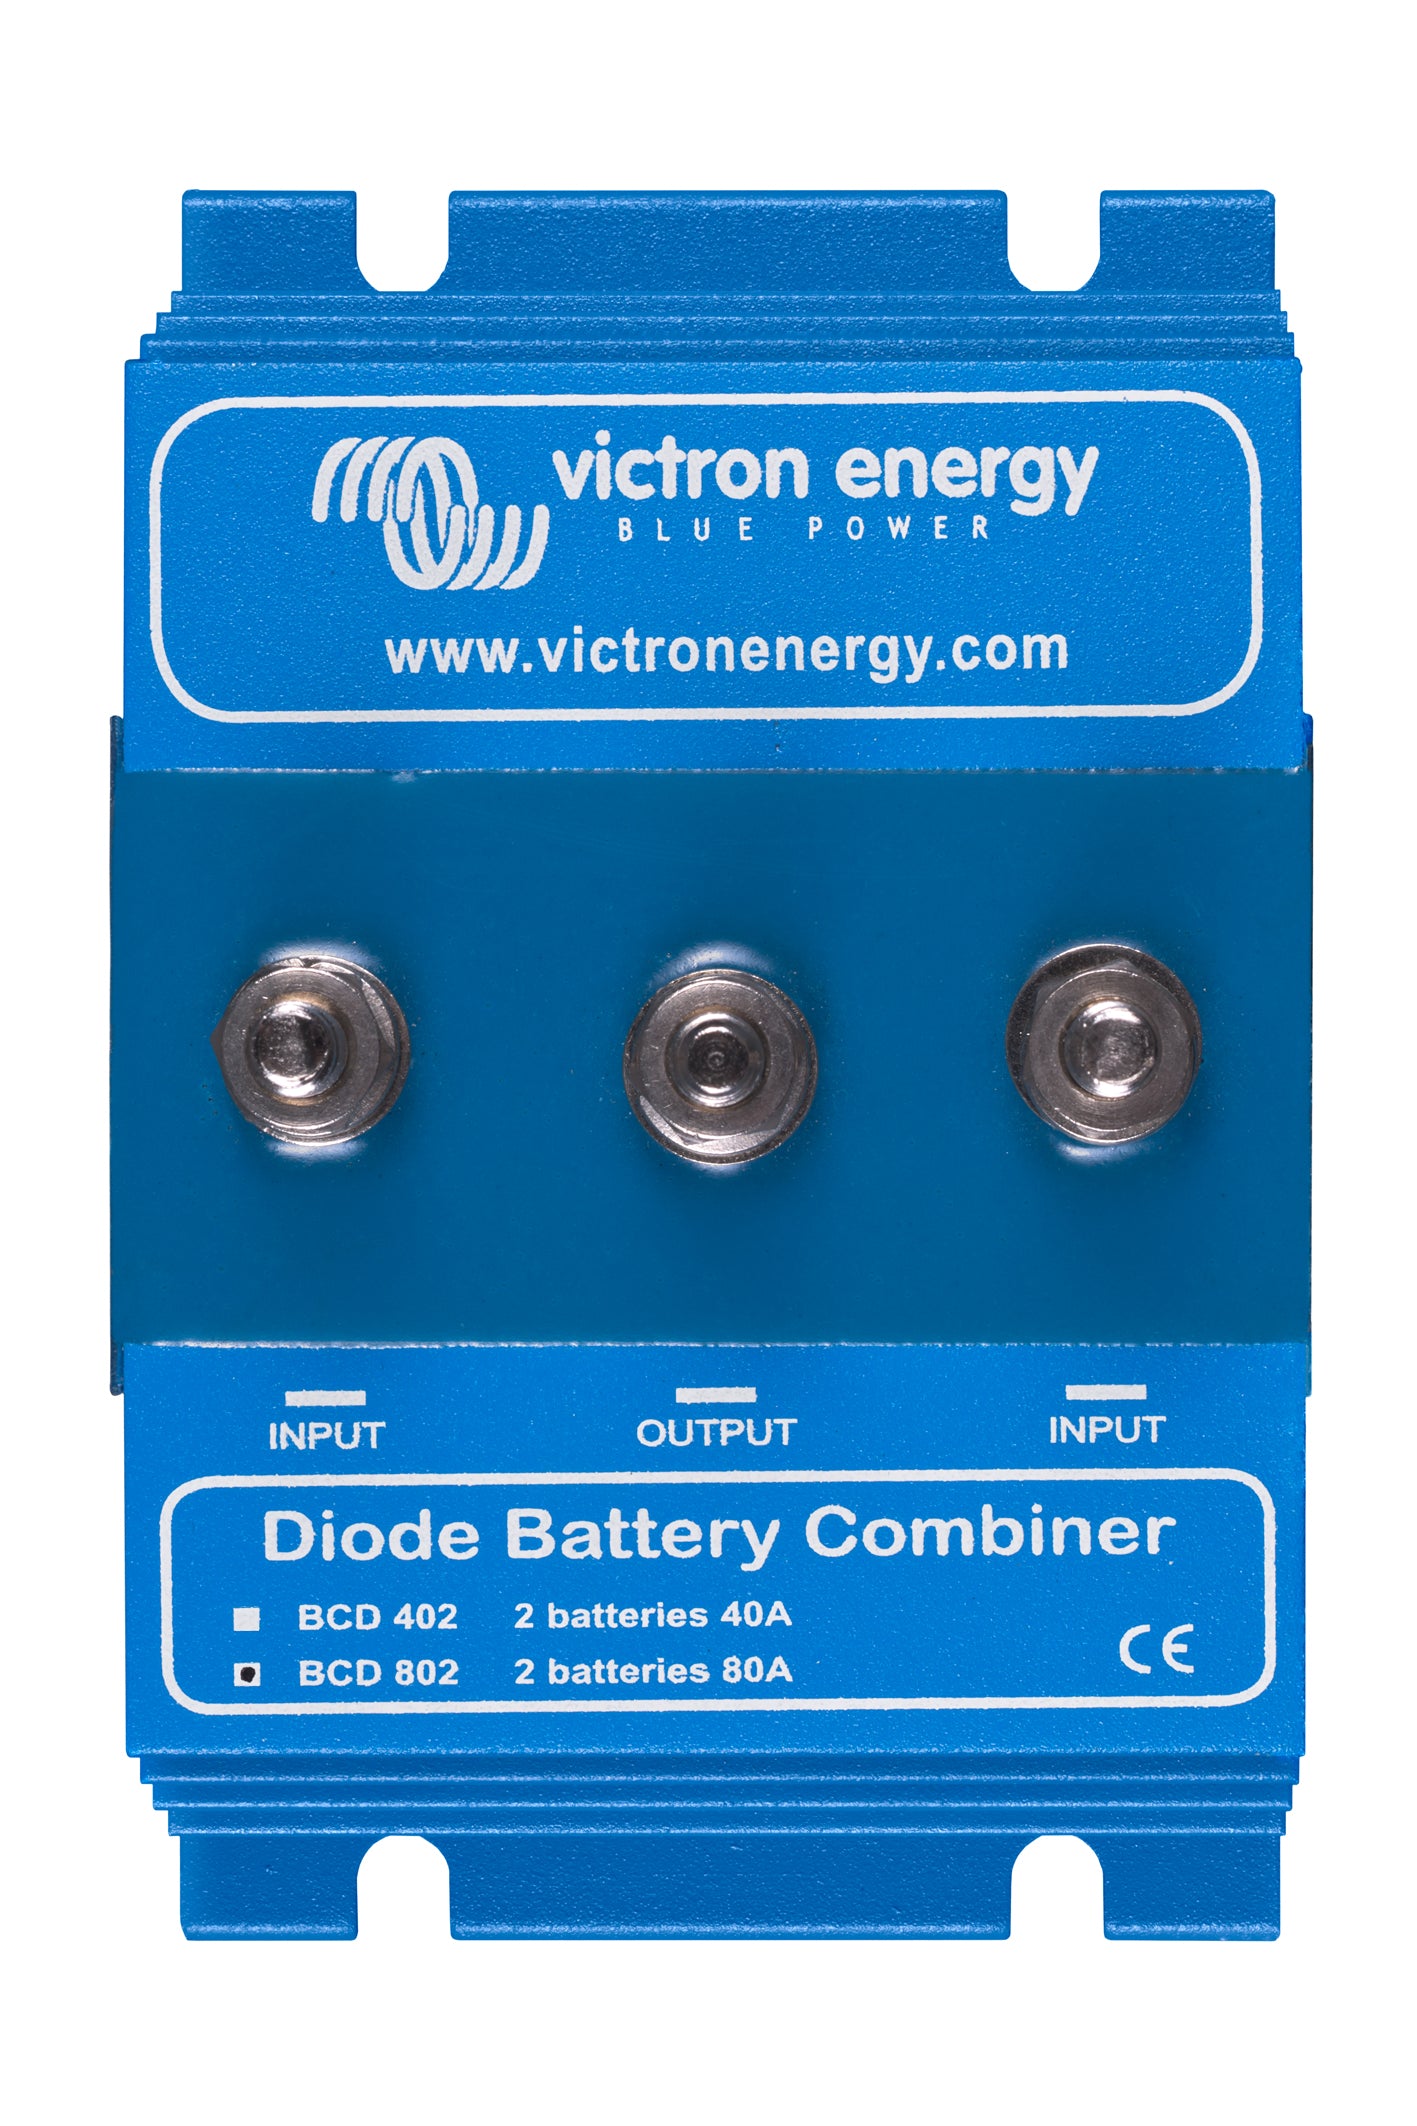 Victron Battery Combiner Diode BCD000402000 BCD 402 2 batteries 40A (combiner diode)